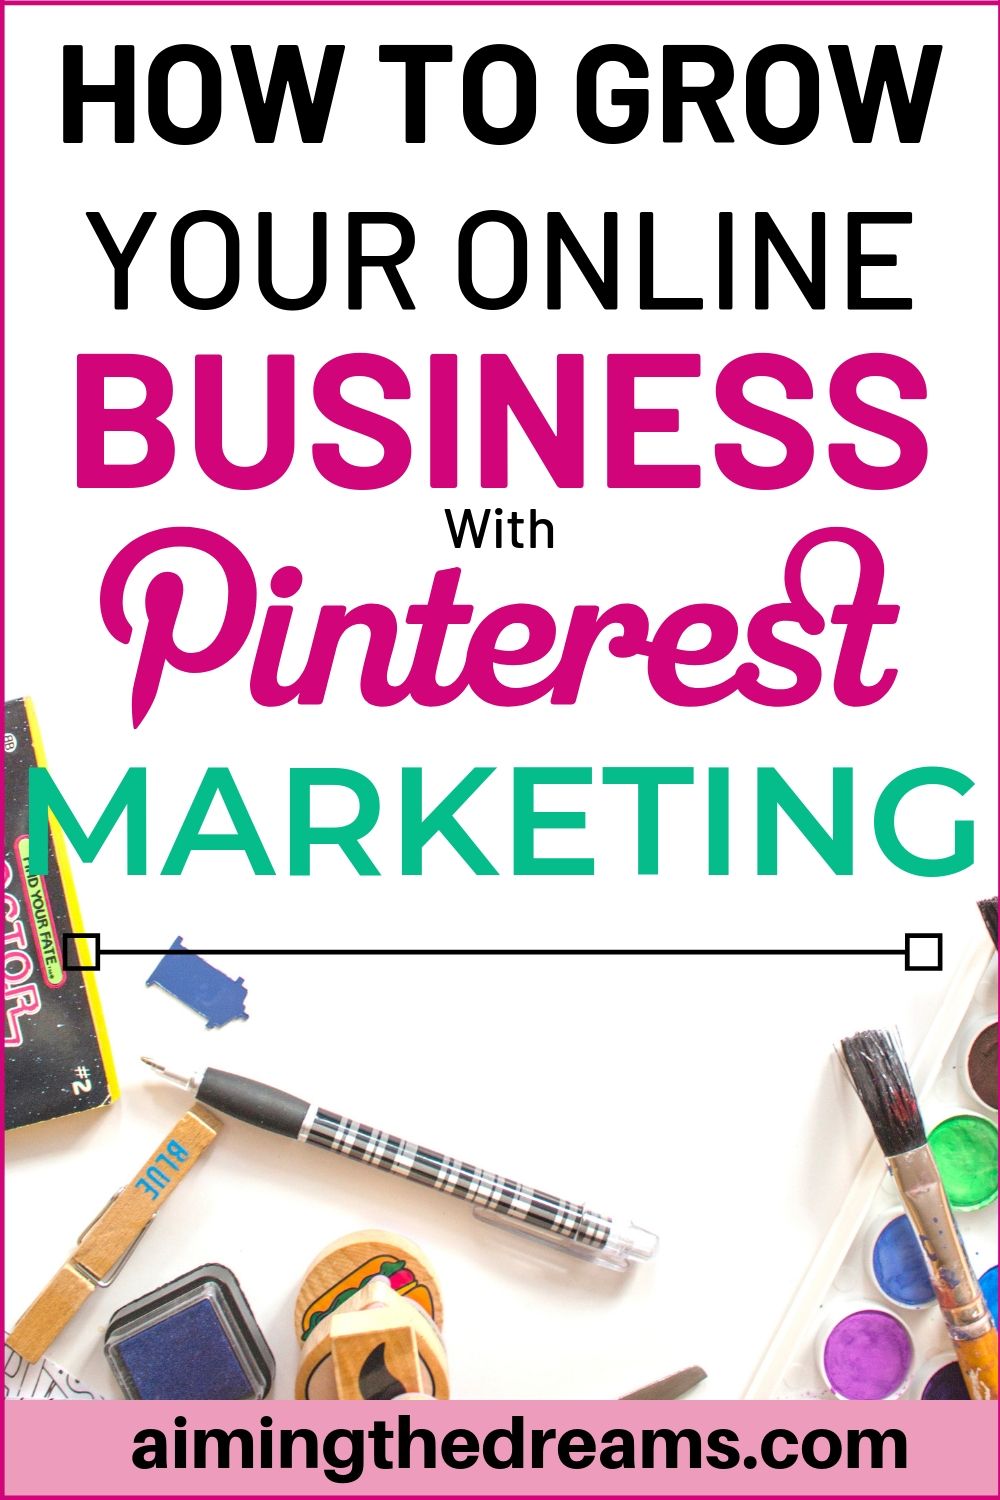 How to grow online business with Pinterest marketing strategies. Pinterest can be huge for the businesses.